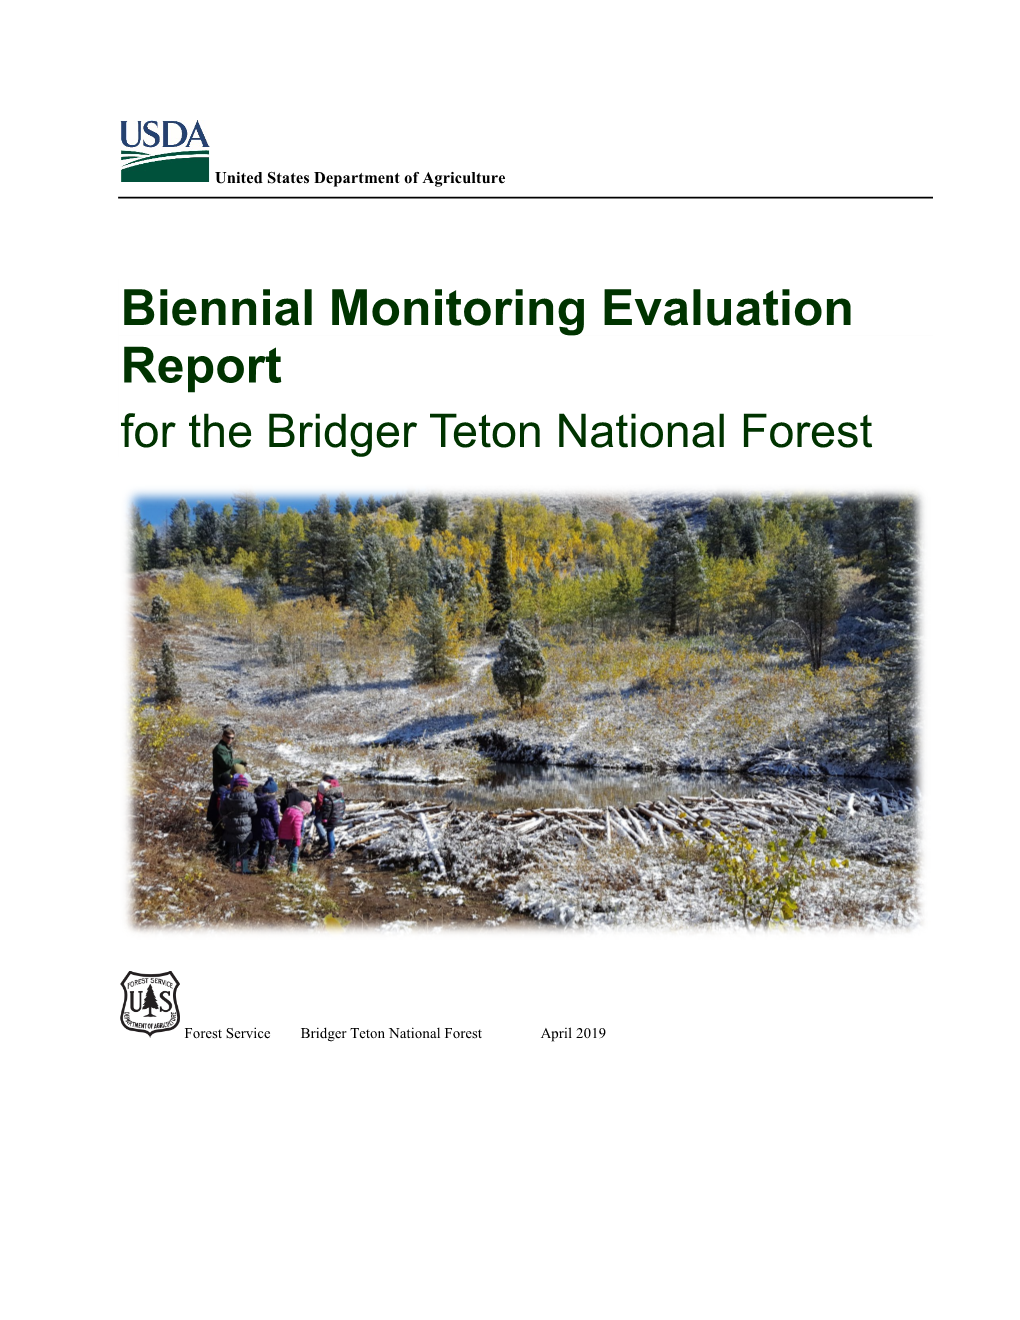 Biennial Monitoring Evaluation Report for the Bridger Teton National Forest